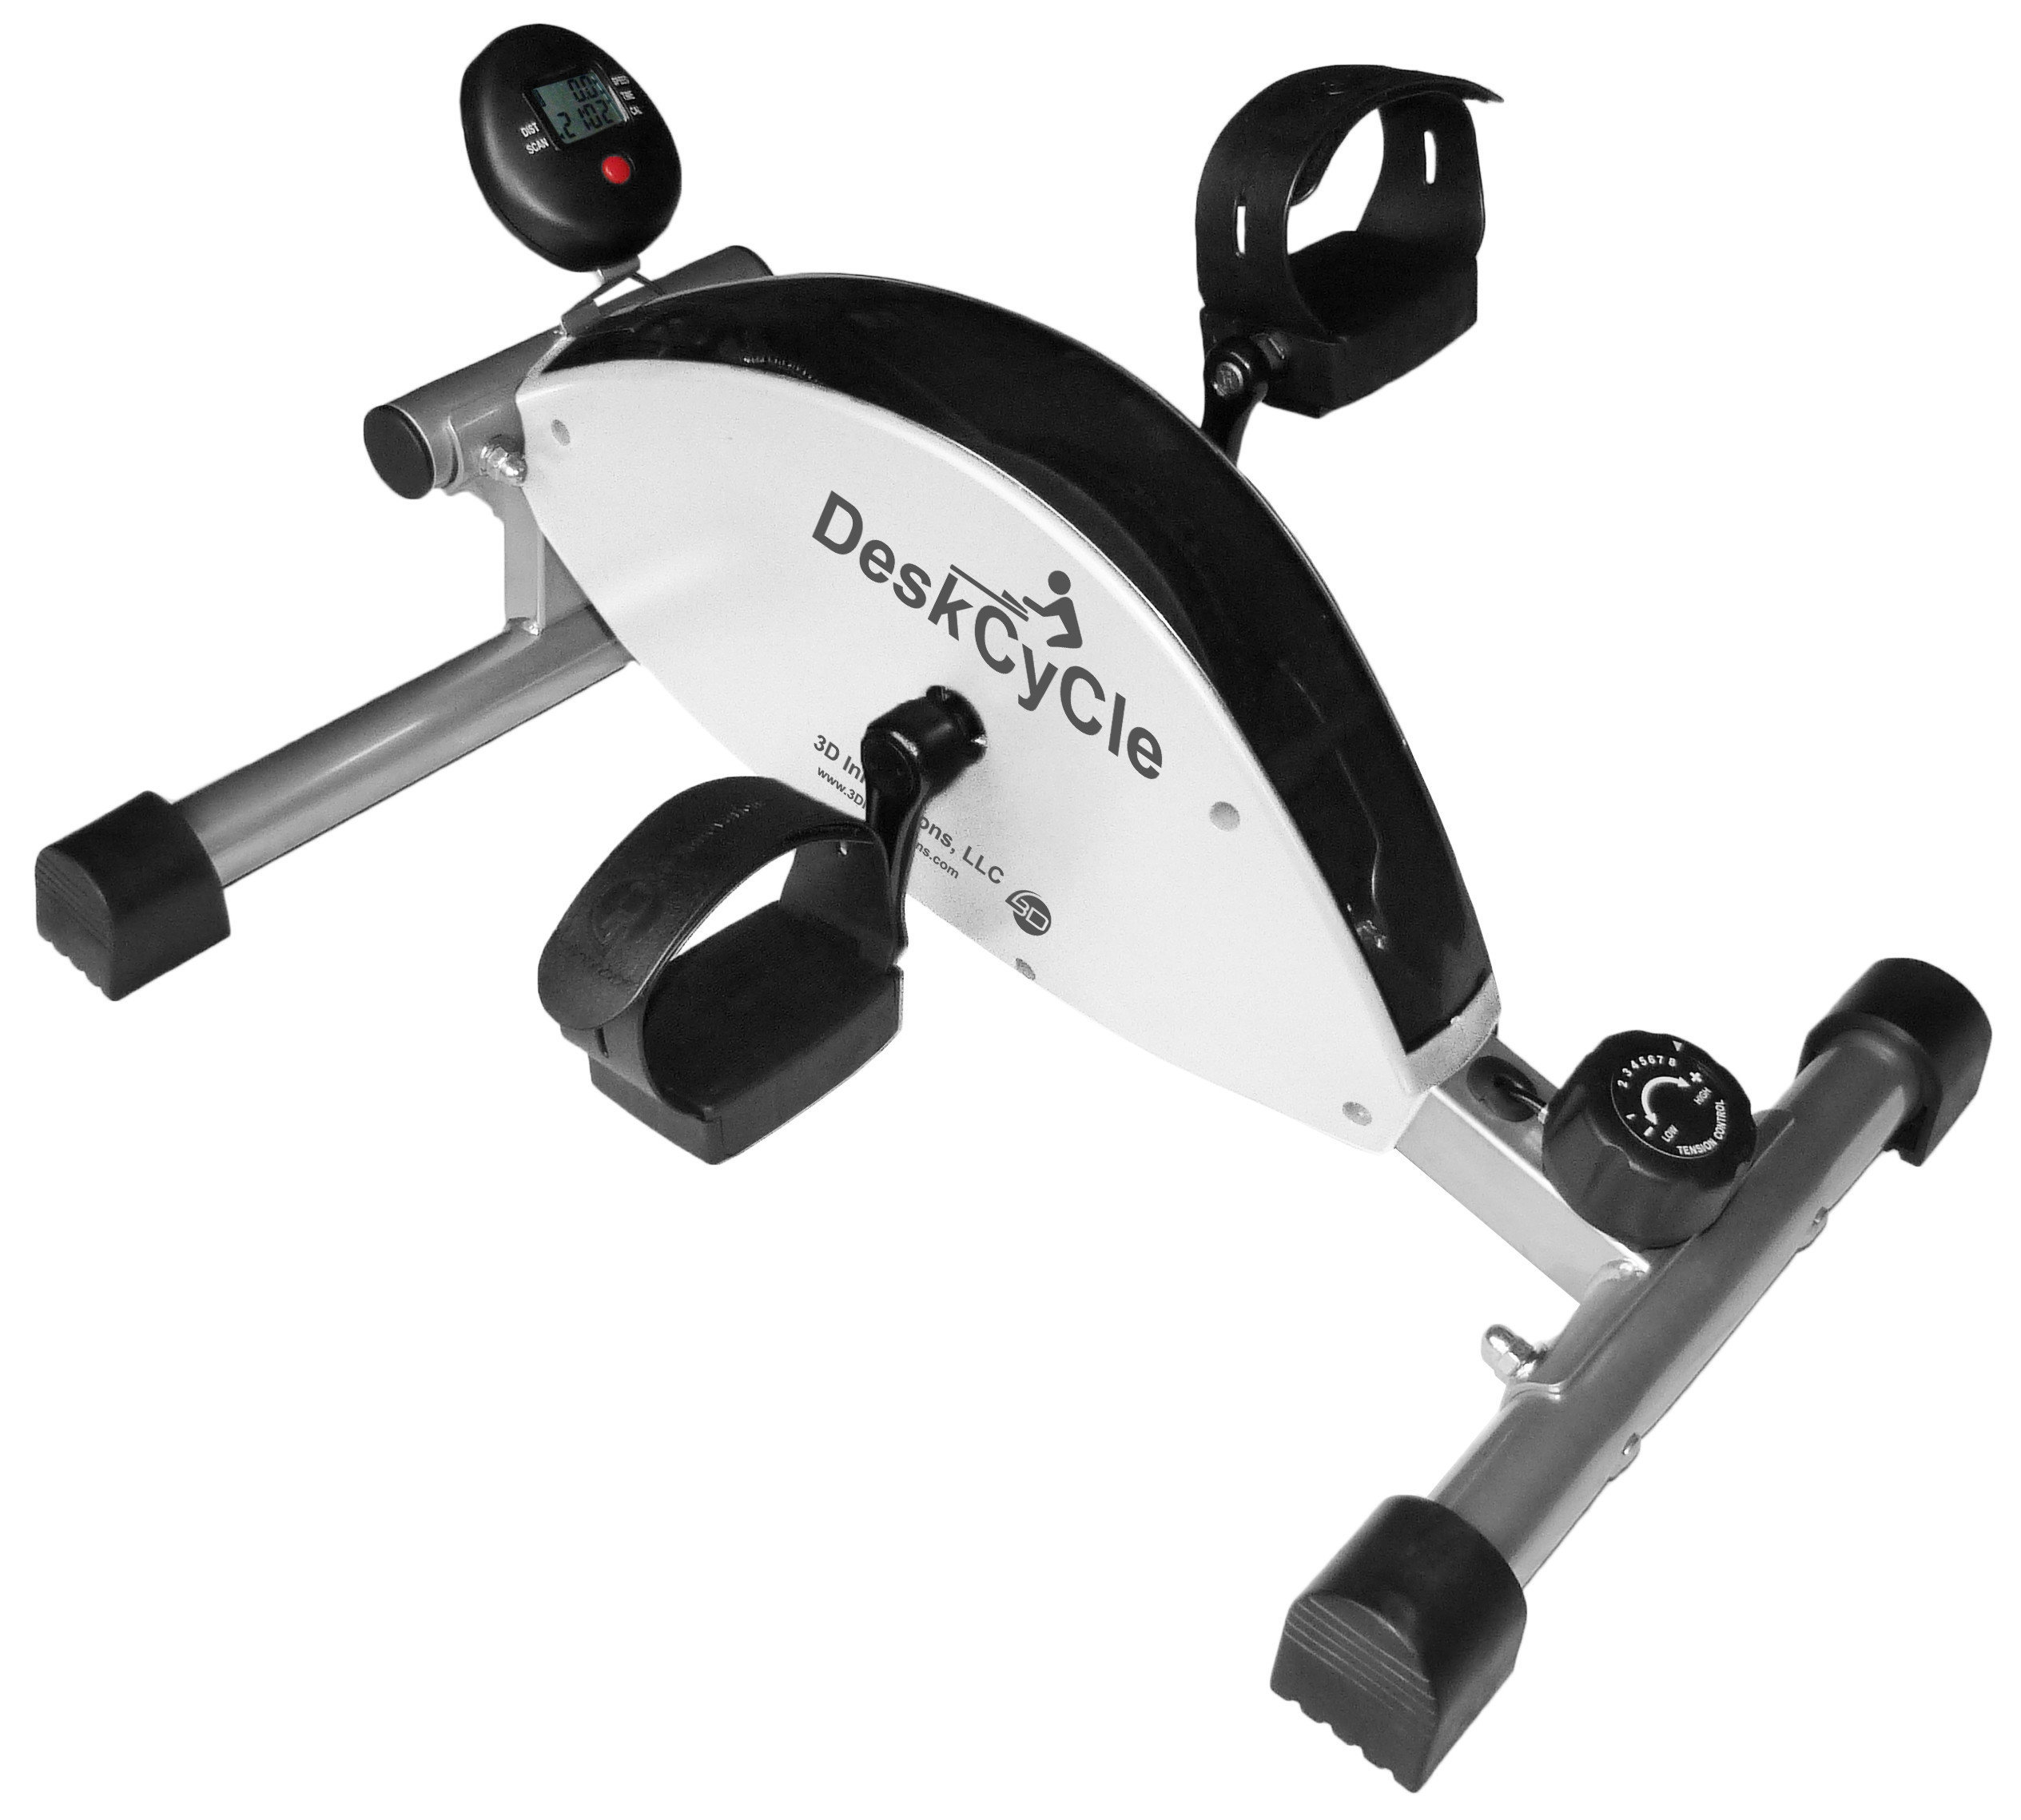 fitdesk under desk cycle